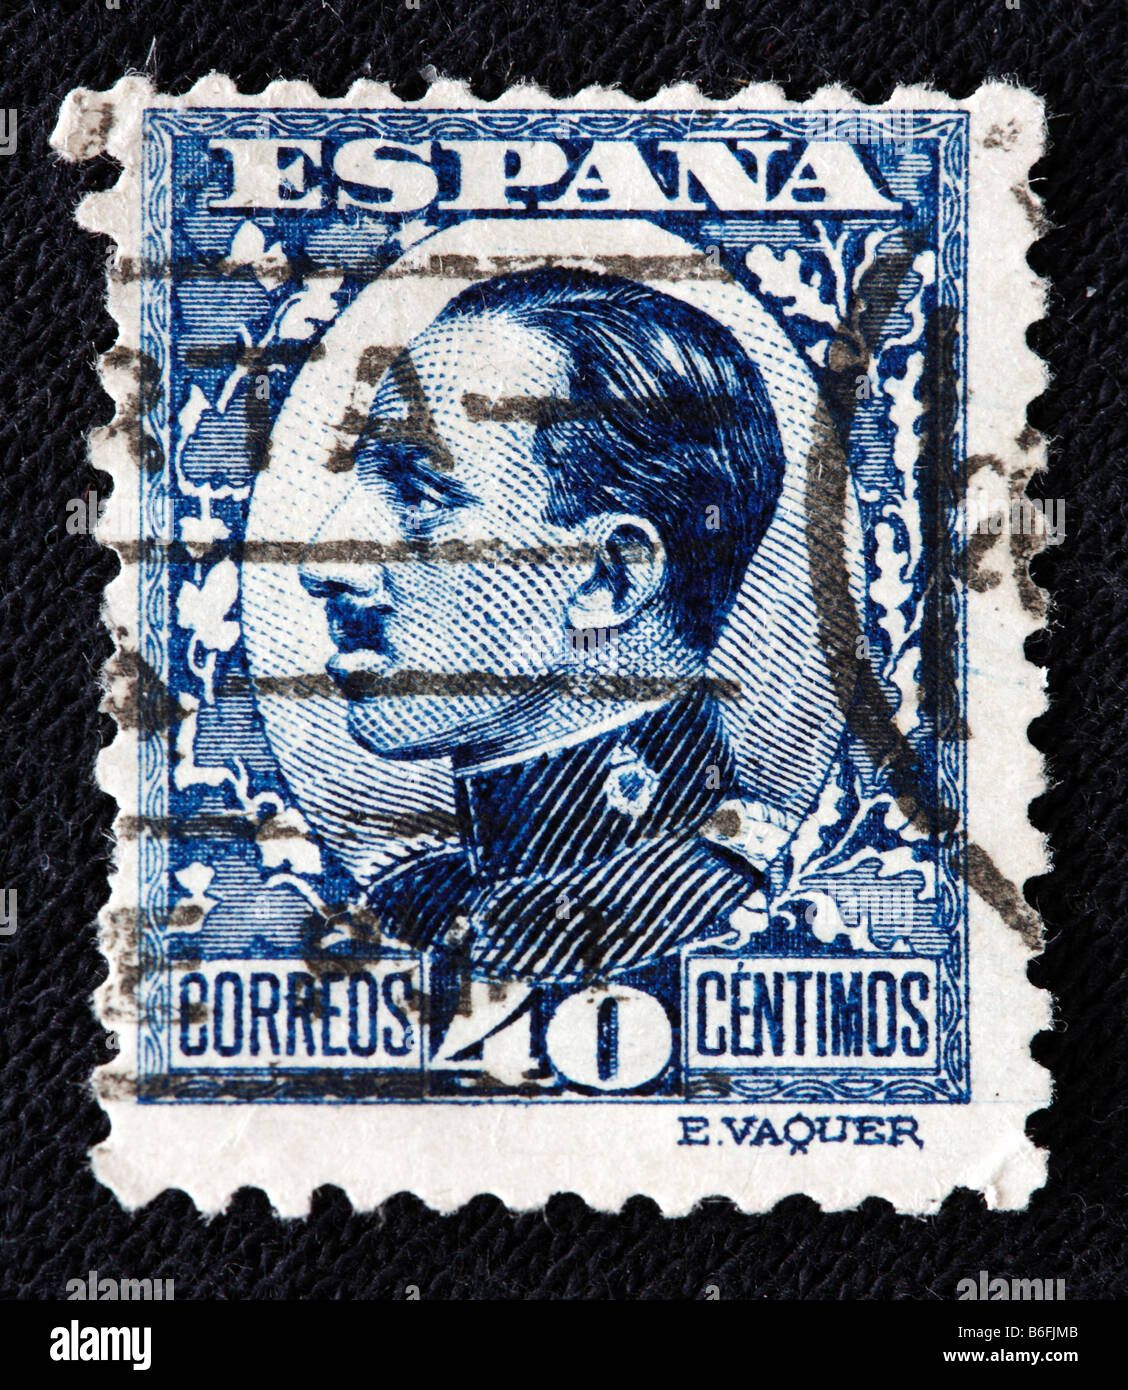 King Alfonso XIII of Spain (1886-1931), postage stamp, Spain Stock Photo